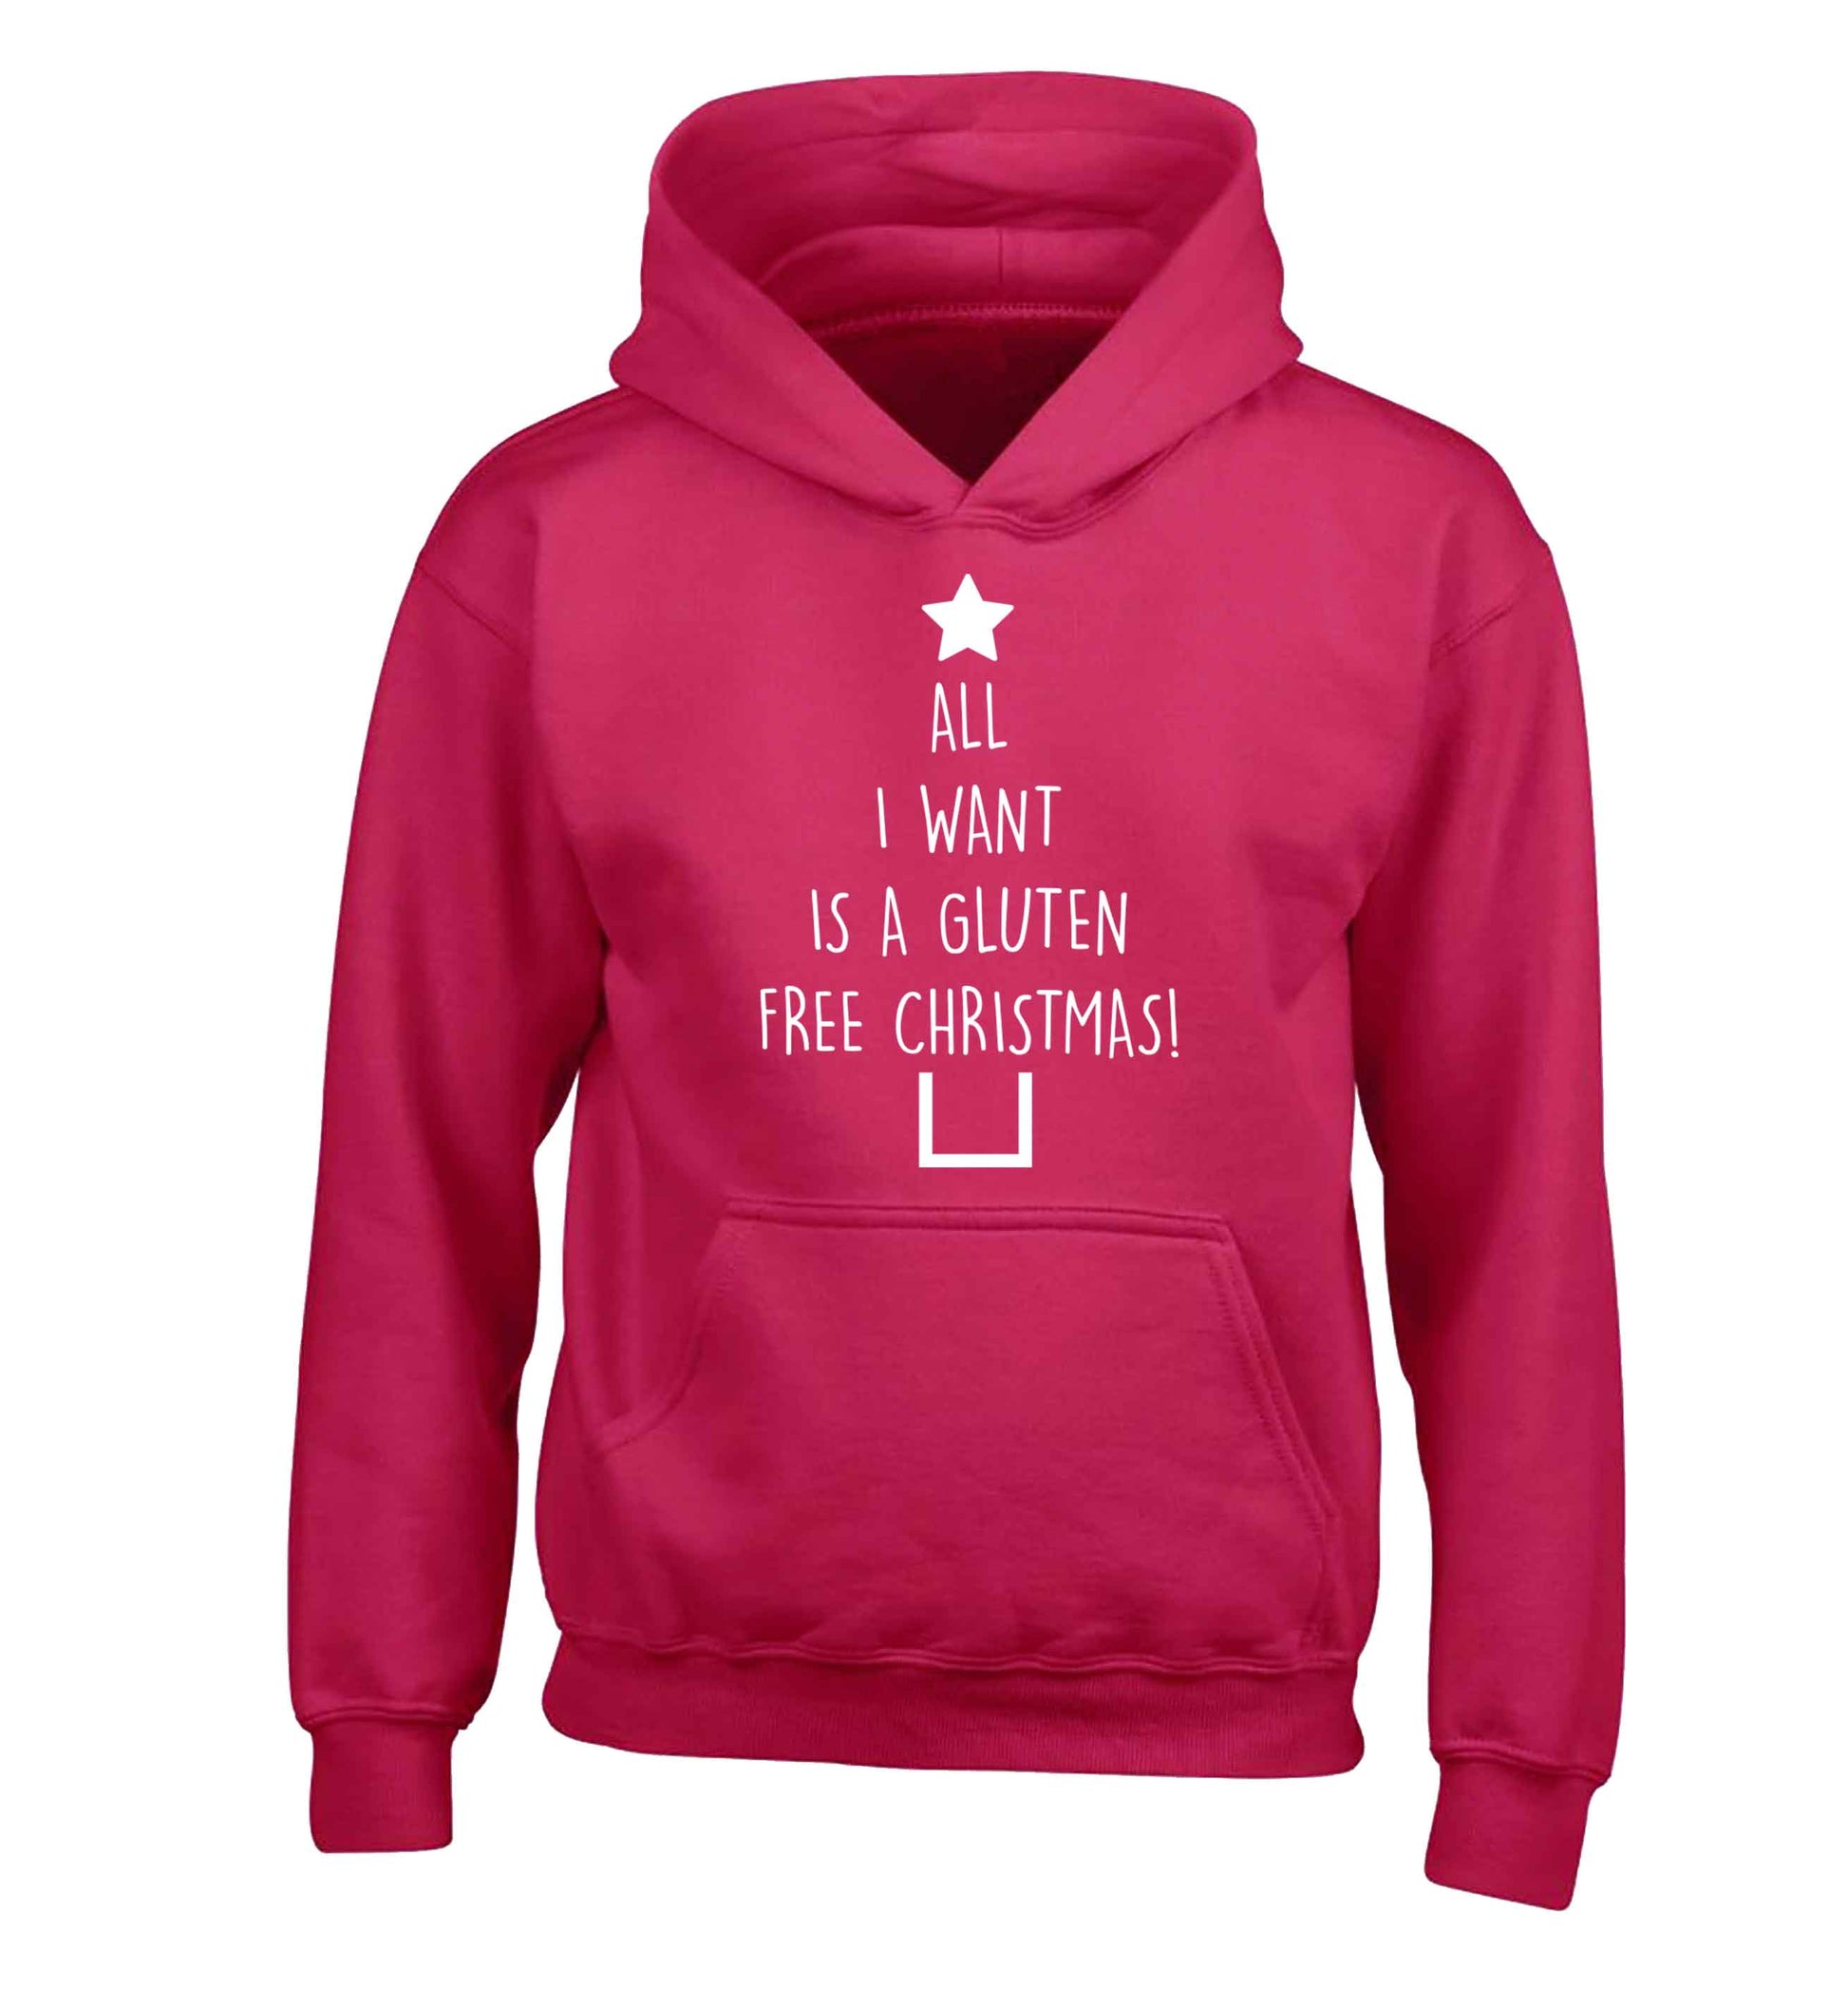 All I want is a gluten free Christmas children's pink hoodie 12-13 Years